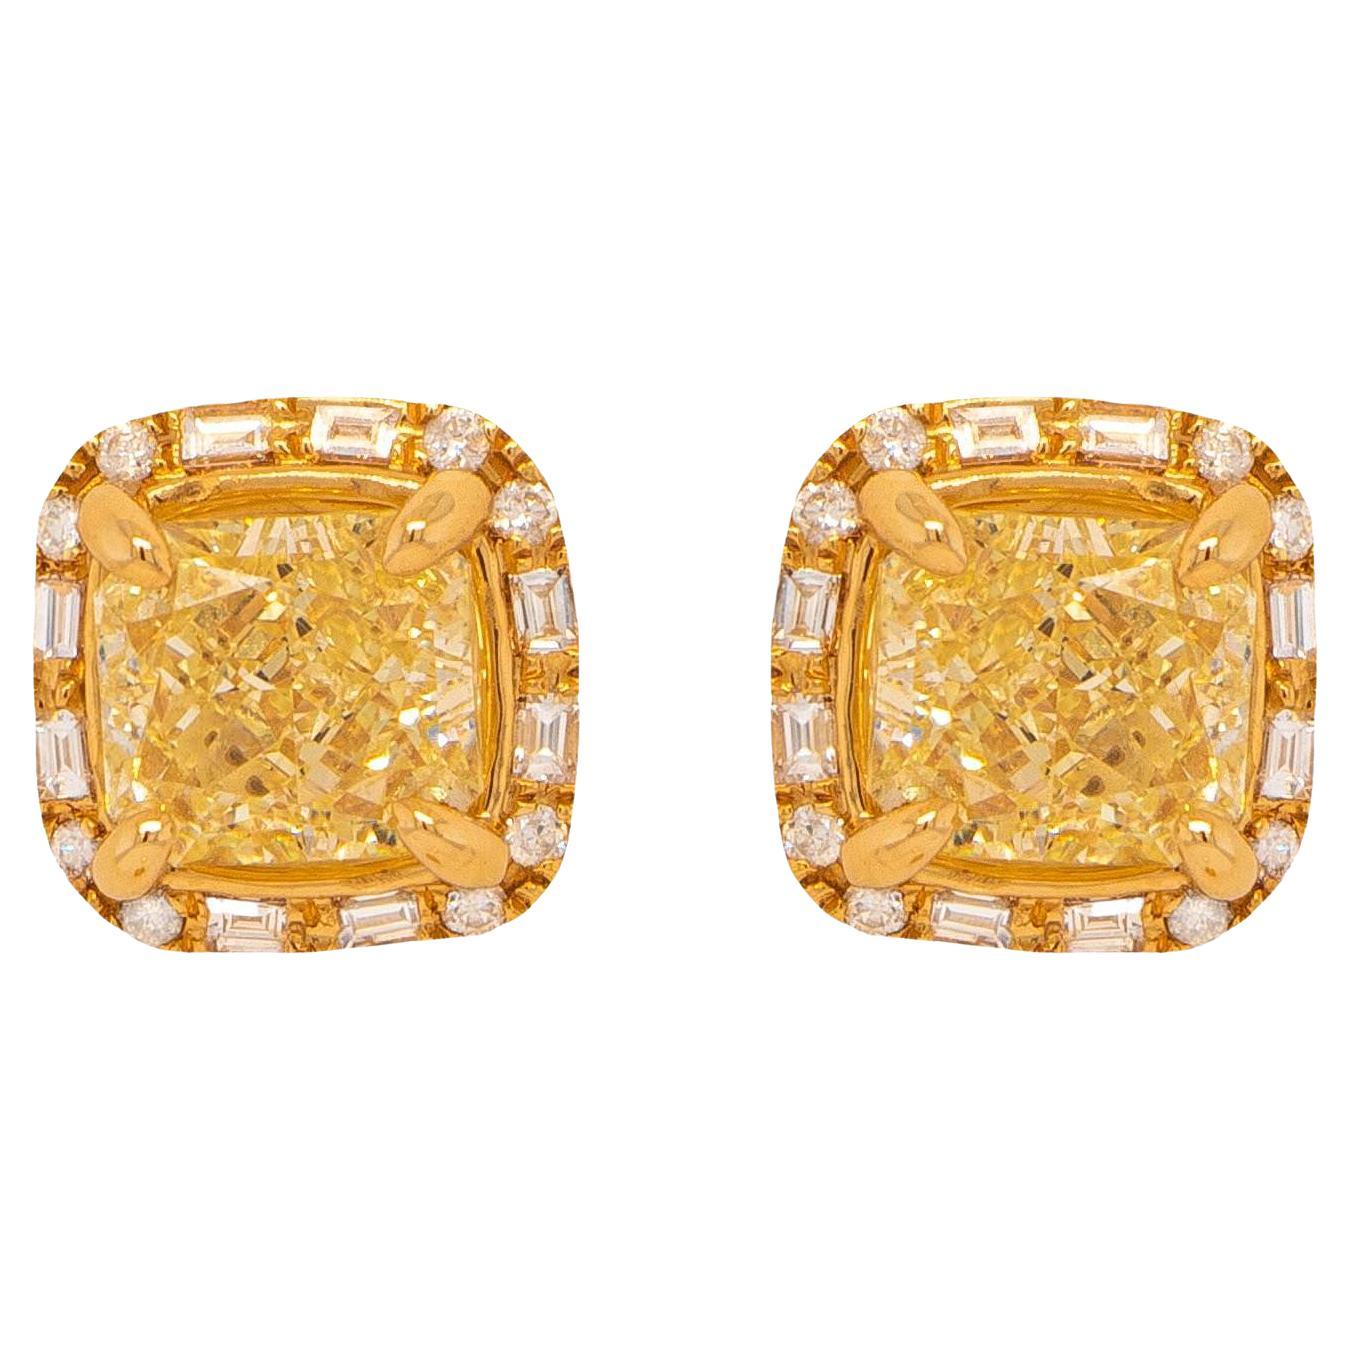 Two Original GIA Certificates are included
2 GIA Certified Natural Yellow Diamonds = 2.02 Carats
(Cut: Radiant; Color: U-V, W-X; Clarity: VS)
Other Diamonds = 0.25 Carats
(Cut: Baguette, Round; Color: G-H, Clarity: VVS-VS)
Metal: 18K Yellow Gold